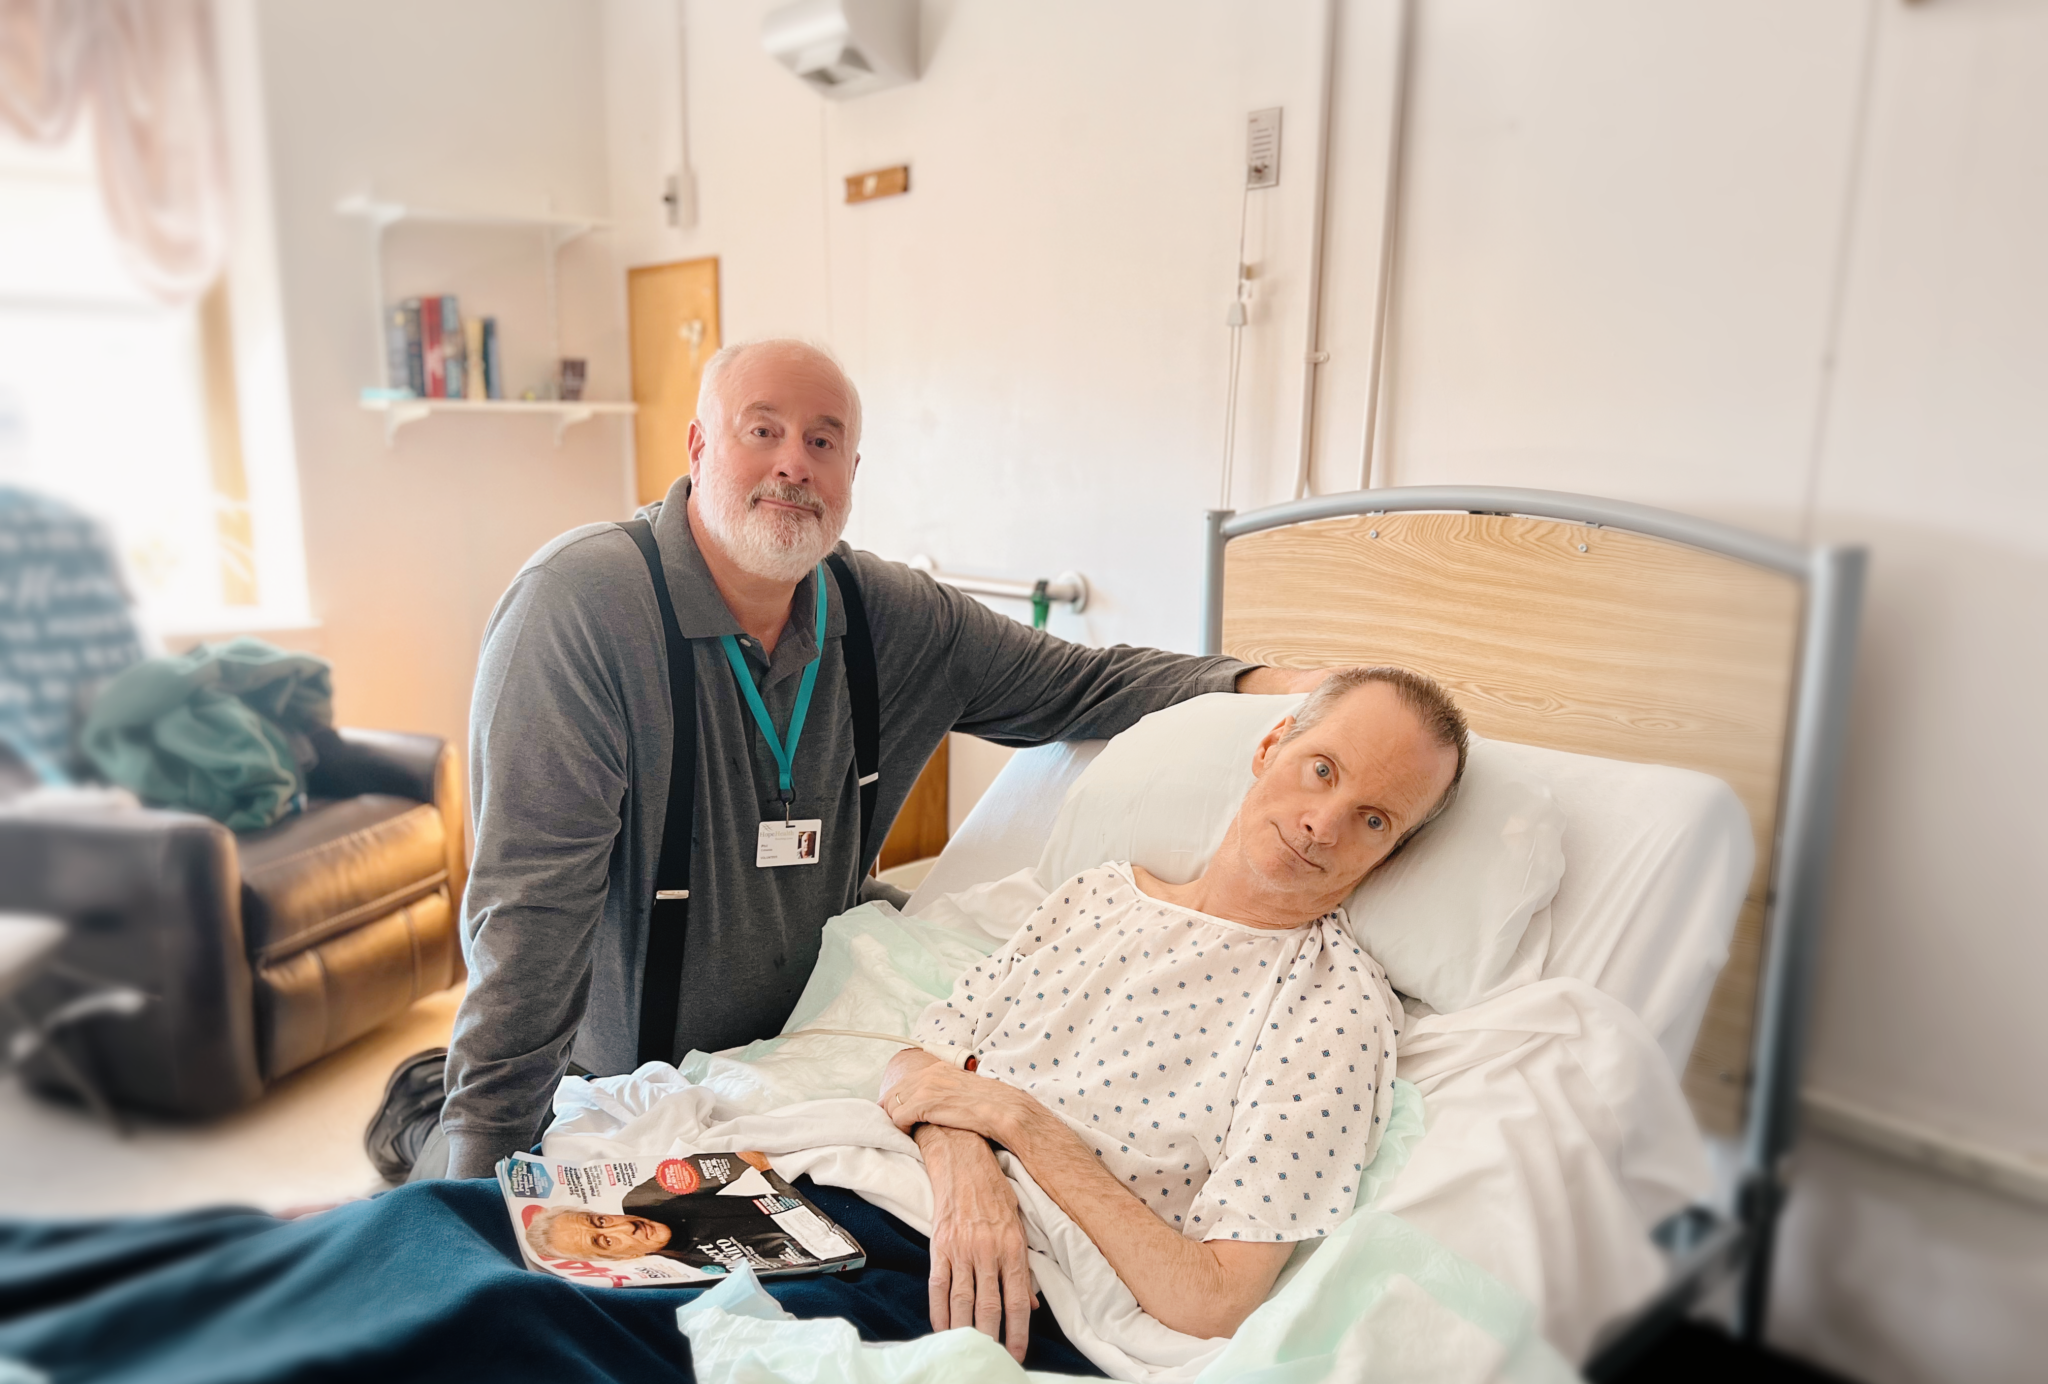 A man in a gray shirt and suspenders compassionately sits by a male hospice patient who is laying in a hospital bed